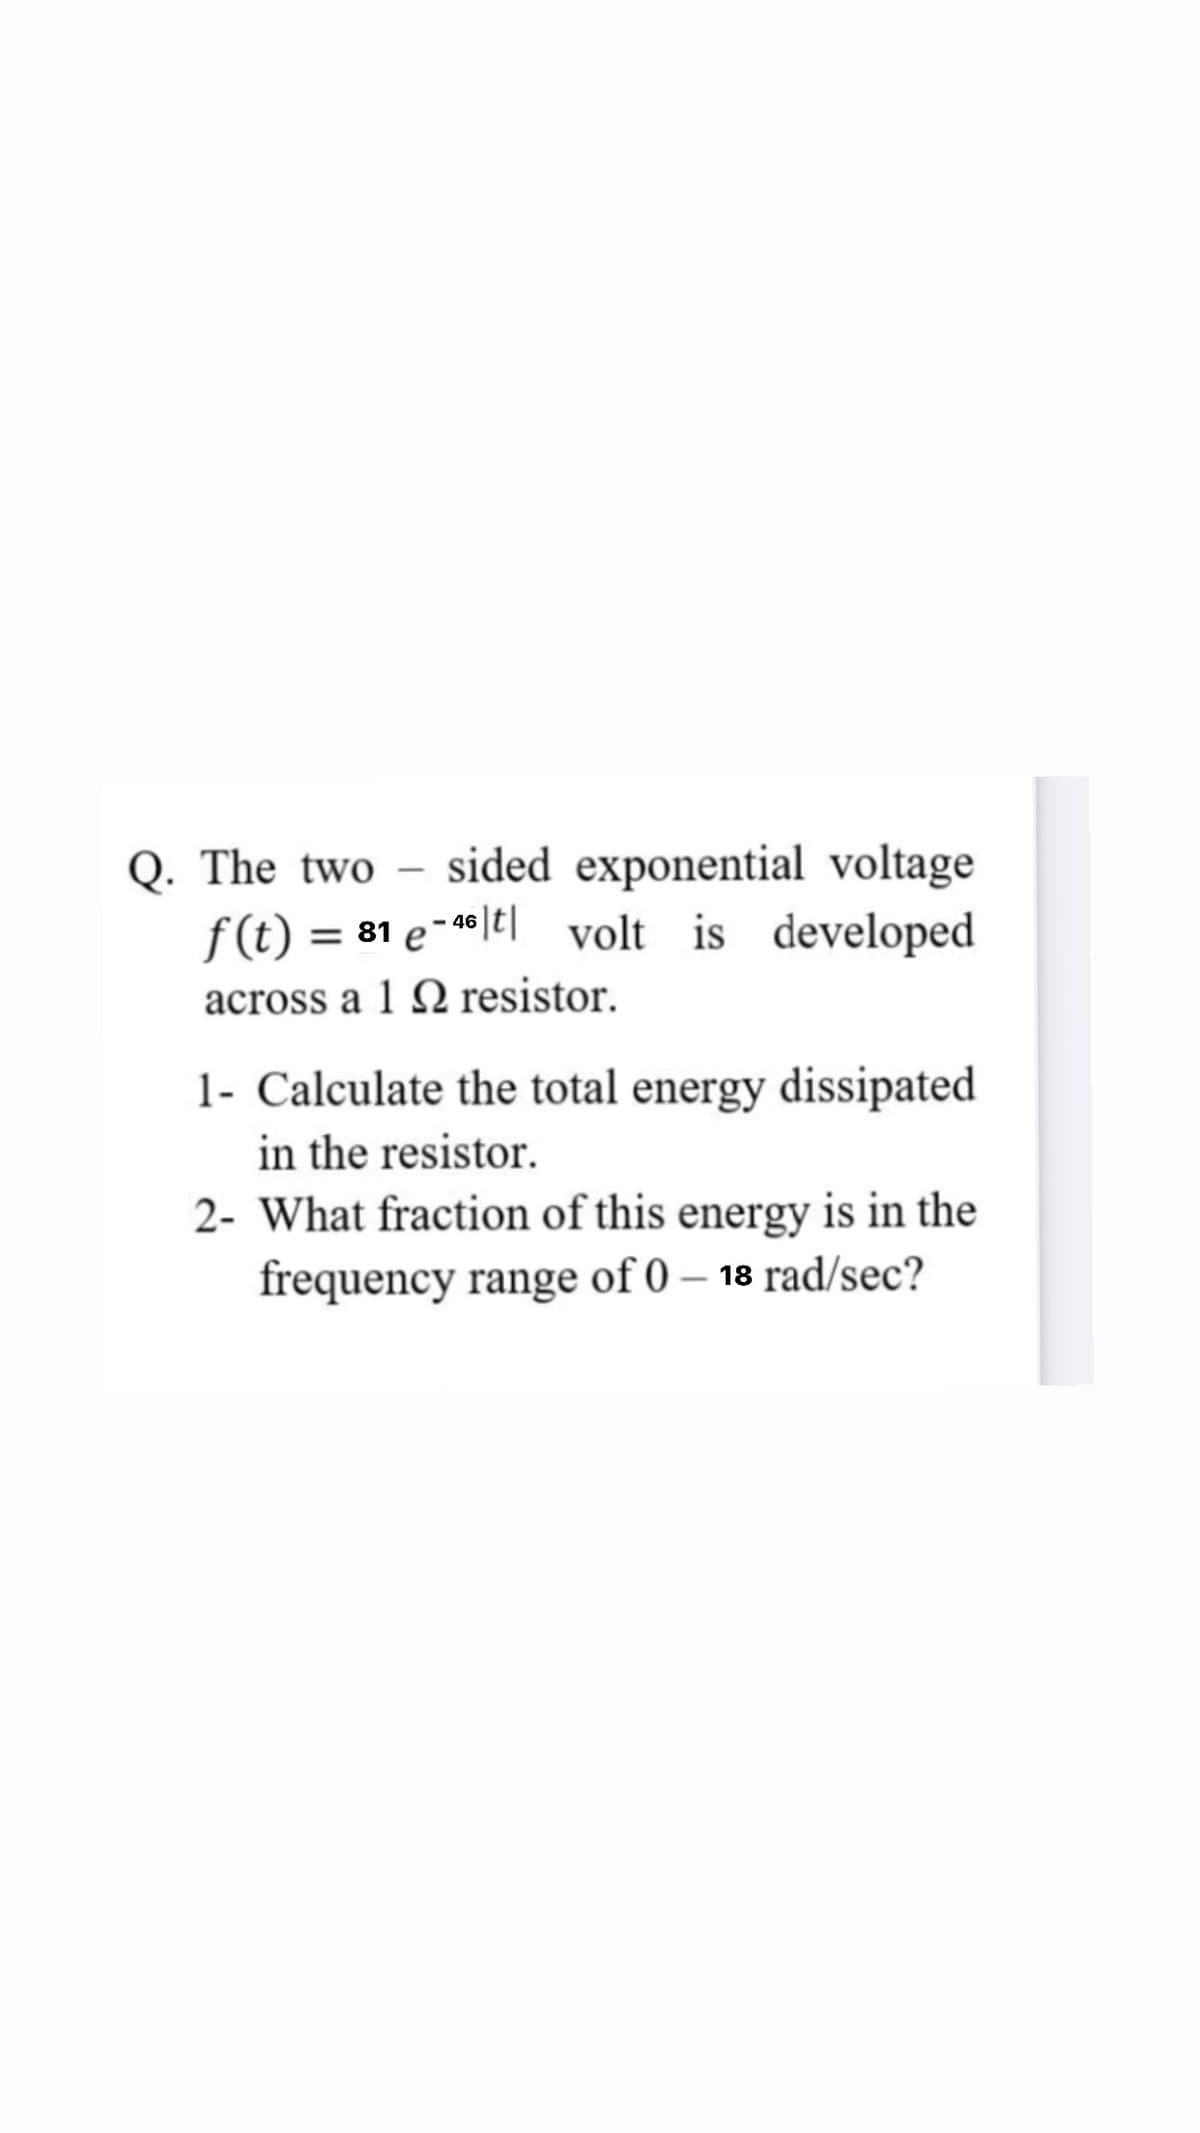 Q. The two
sided exponential voltage
-
f (t) = 81 e-*|t| volt is developed
- 46
across a 1 Q resistor.
1- Calculate the total energy dissipated
in the resistor.
2- What fraction of this energy is in the
frequency range of 0 – 18 rad/sec?
